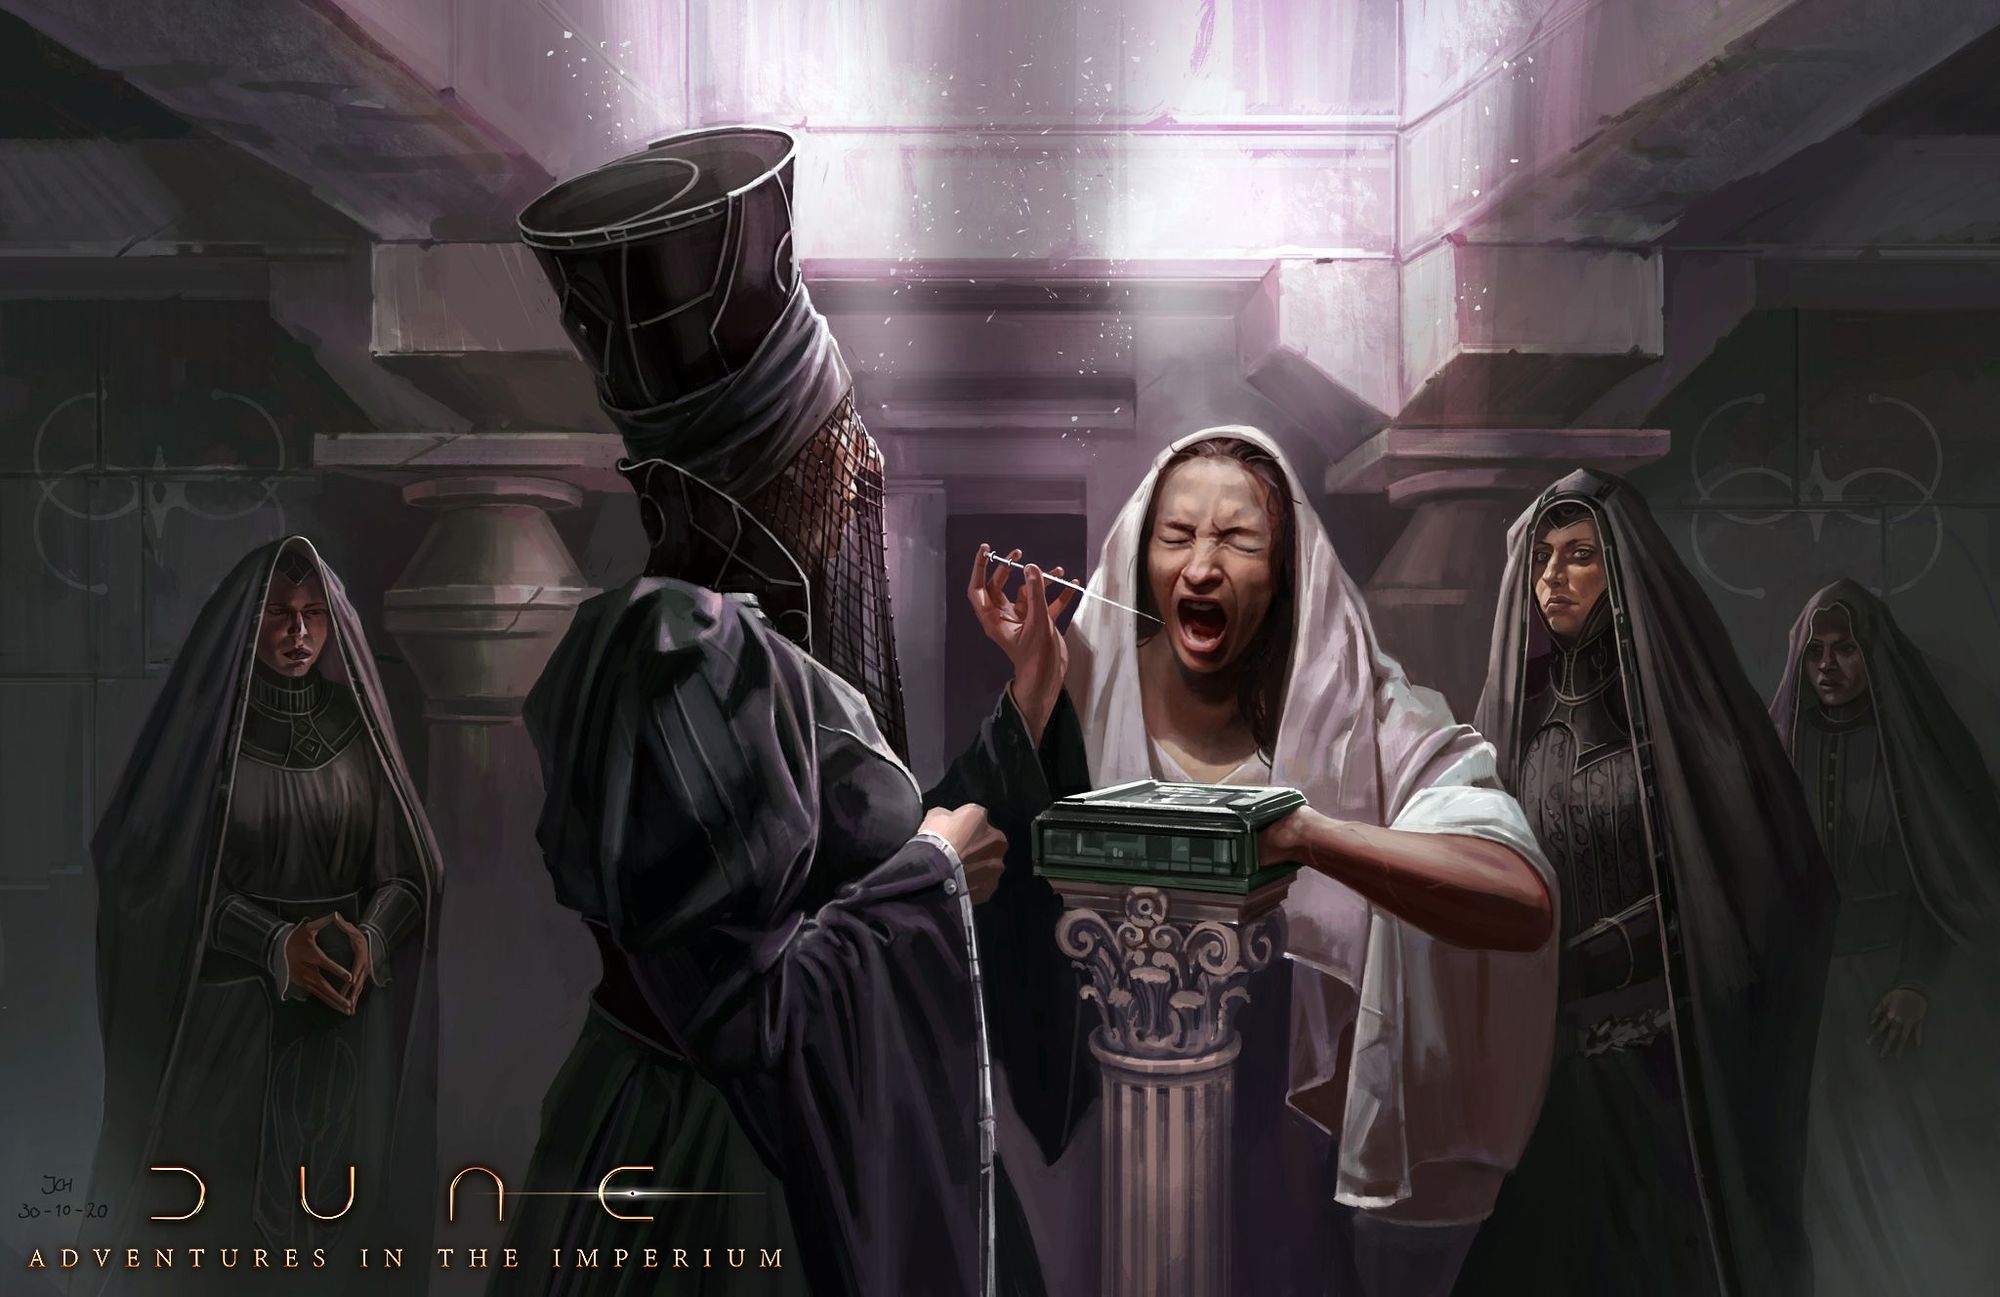 Black-robed Bene Gesserit sisters surround a woman in white who has one hand in a box. A mother of the Bene Gesserit holds a Gom Jabar needle to the woman in white's neck.